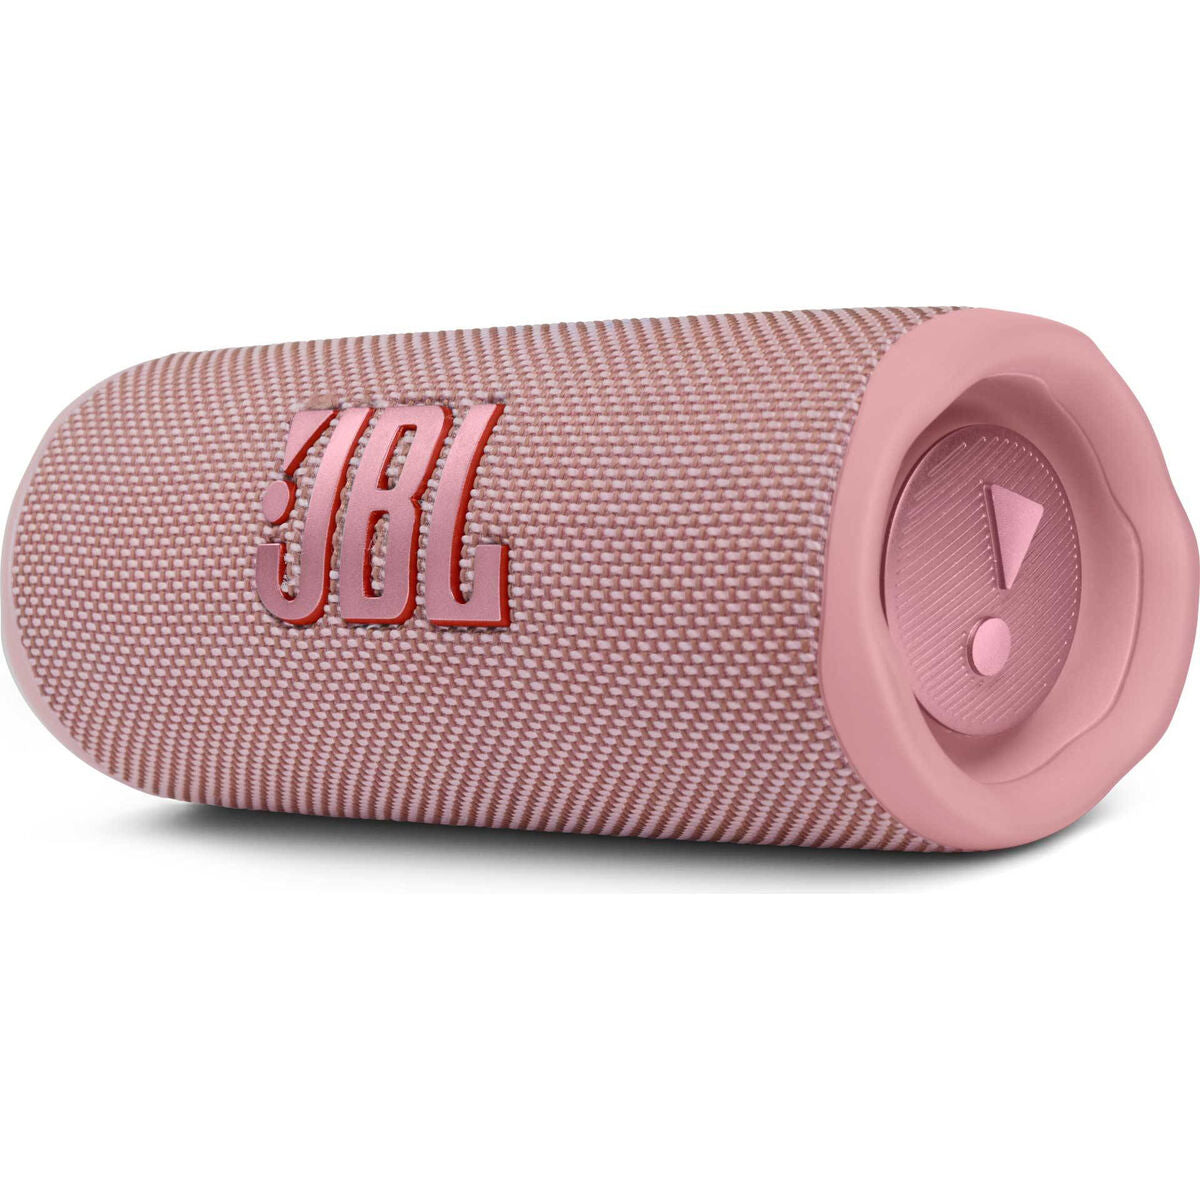 Portable Bluetooth Speakers JBL Flip 6 20 W Pink, JBL, Electronics, Mobile communication and accessories, portable-bluetooth-speakers-jbl-flip-6-20-w-pink, Brand_JBL, category-reference-2609, category-reference-2882, category-reference-2923, category-reference-t-19653, category-reference-t-21311, category-reference-t-25527, category-reference-t-4036, category-reference-t-4037, Condition_NEW, entertainment, music, Price_100 - 200, telephones & tablets, wifi y bluetooth, RiotNook